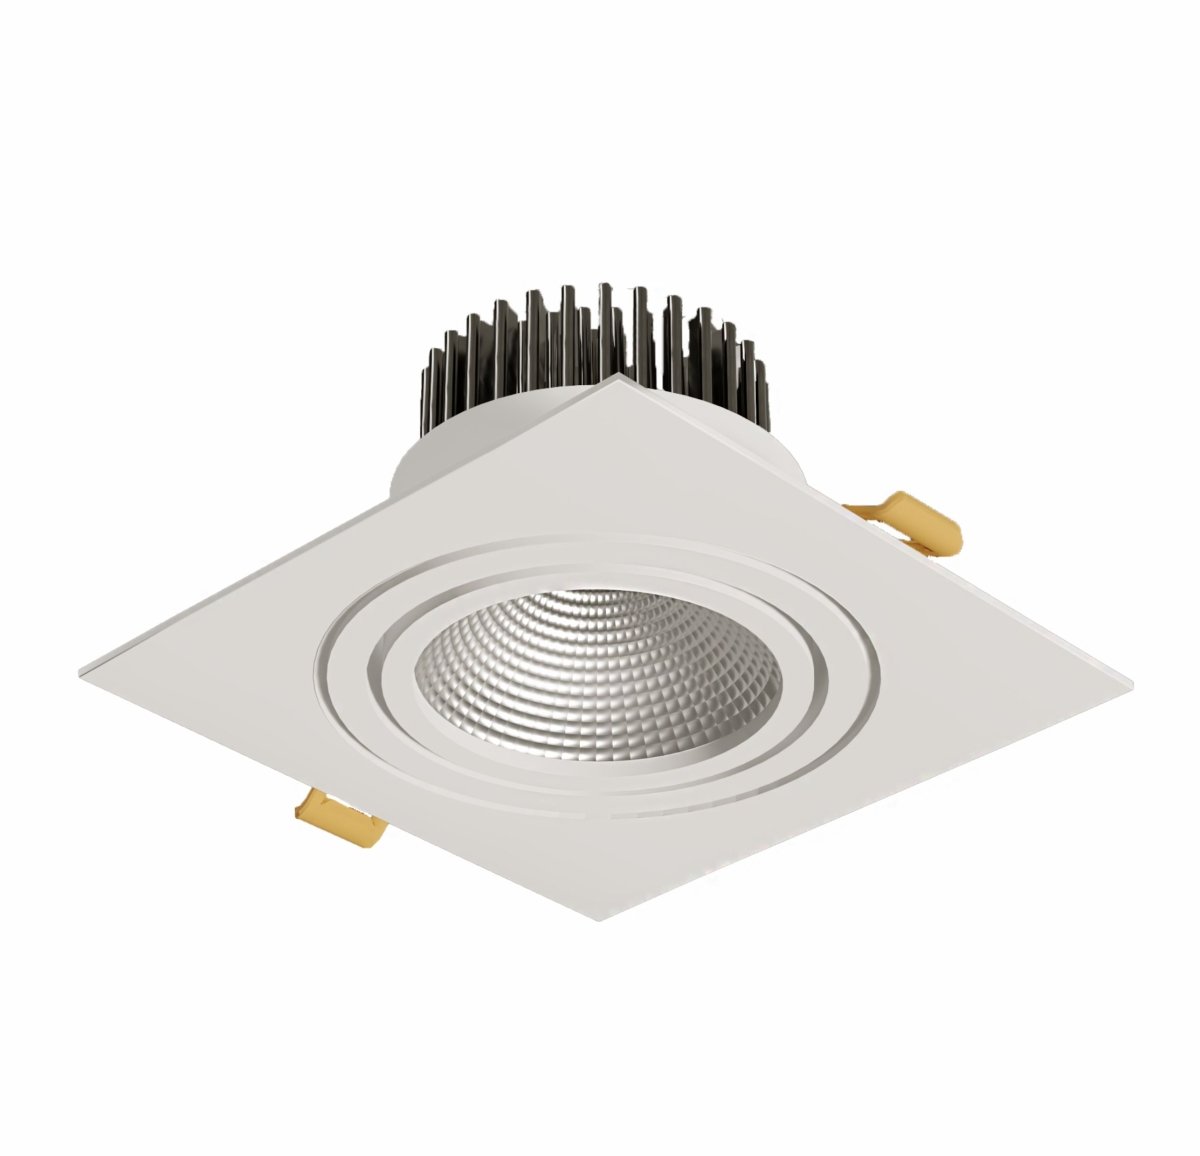 Main image of LED Recessed Downlight 10W Cool White 4000K White IP20